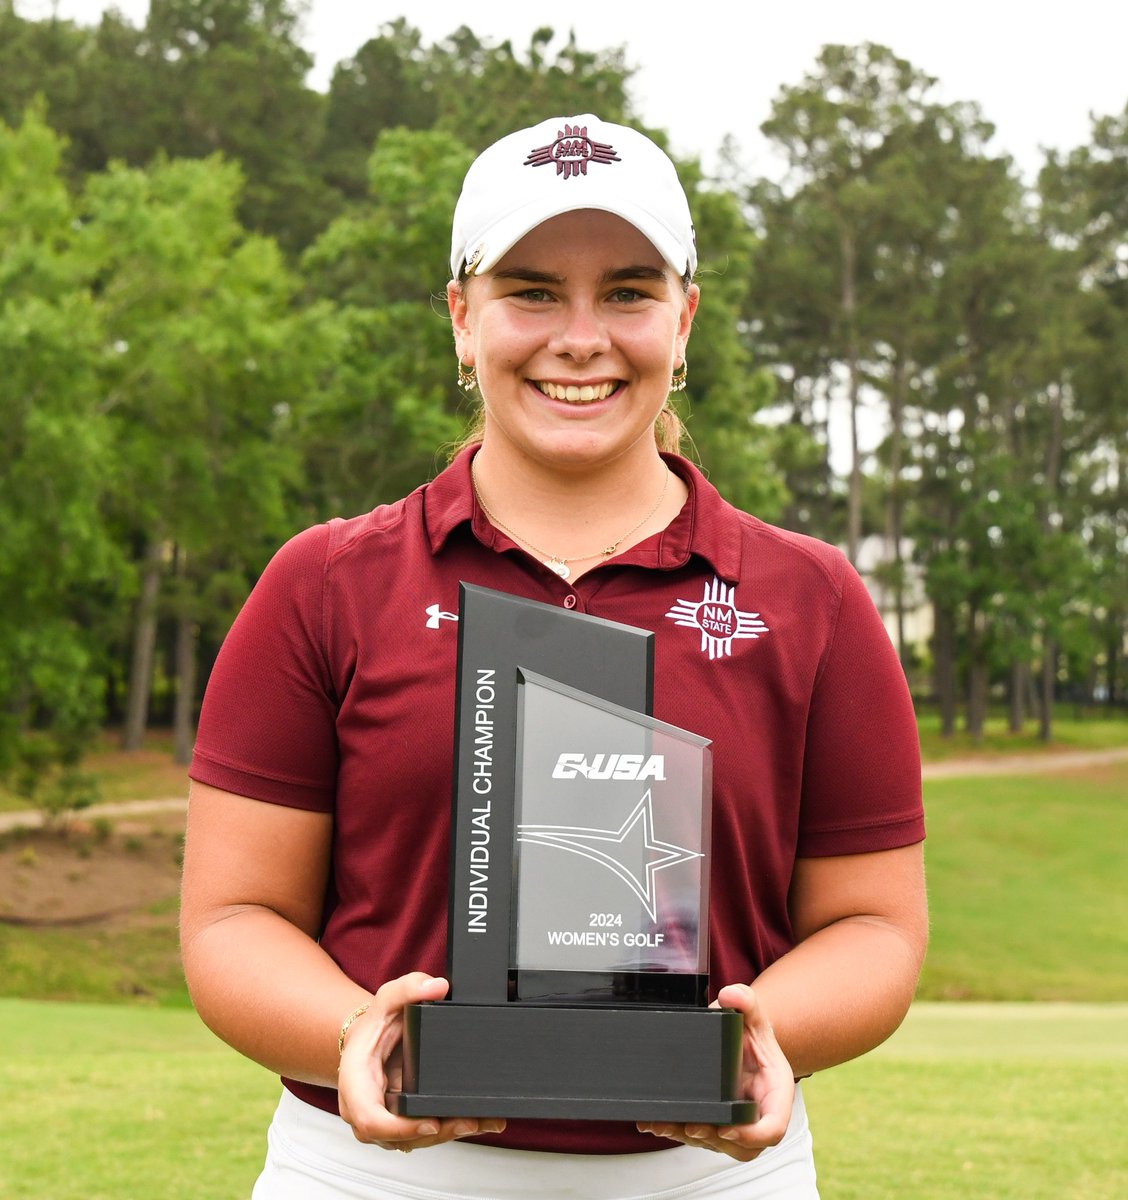 After a three-round score of 209 (-7), @NMStateAggies' Emma Bunch wins her 5th-straight tournament of the spring and the Individual Low Medalist honors ⛳️🏅 #NoLimitsOnUs